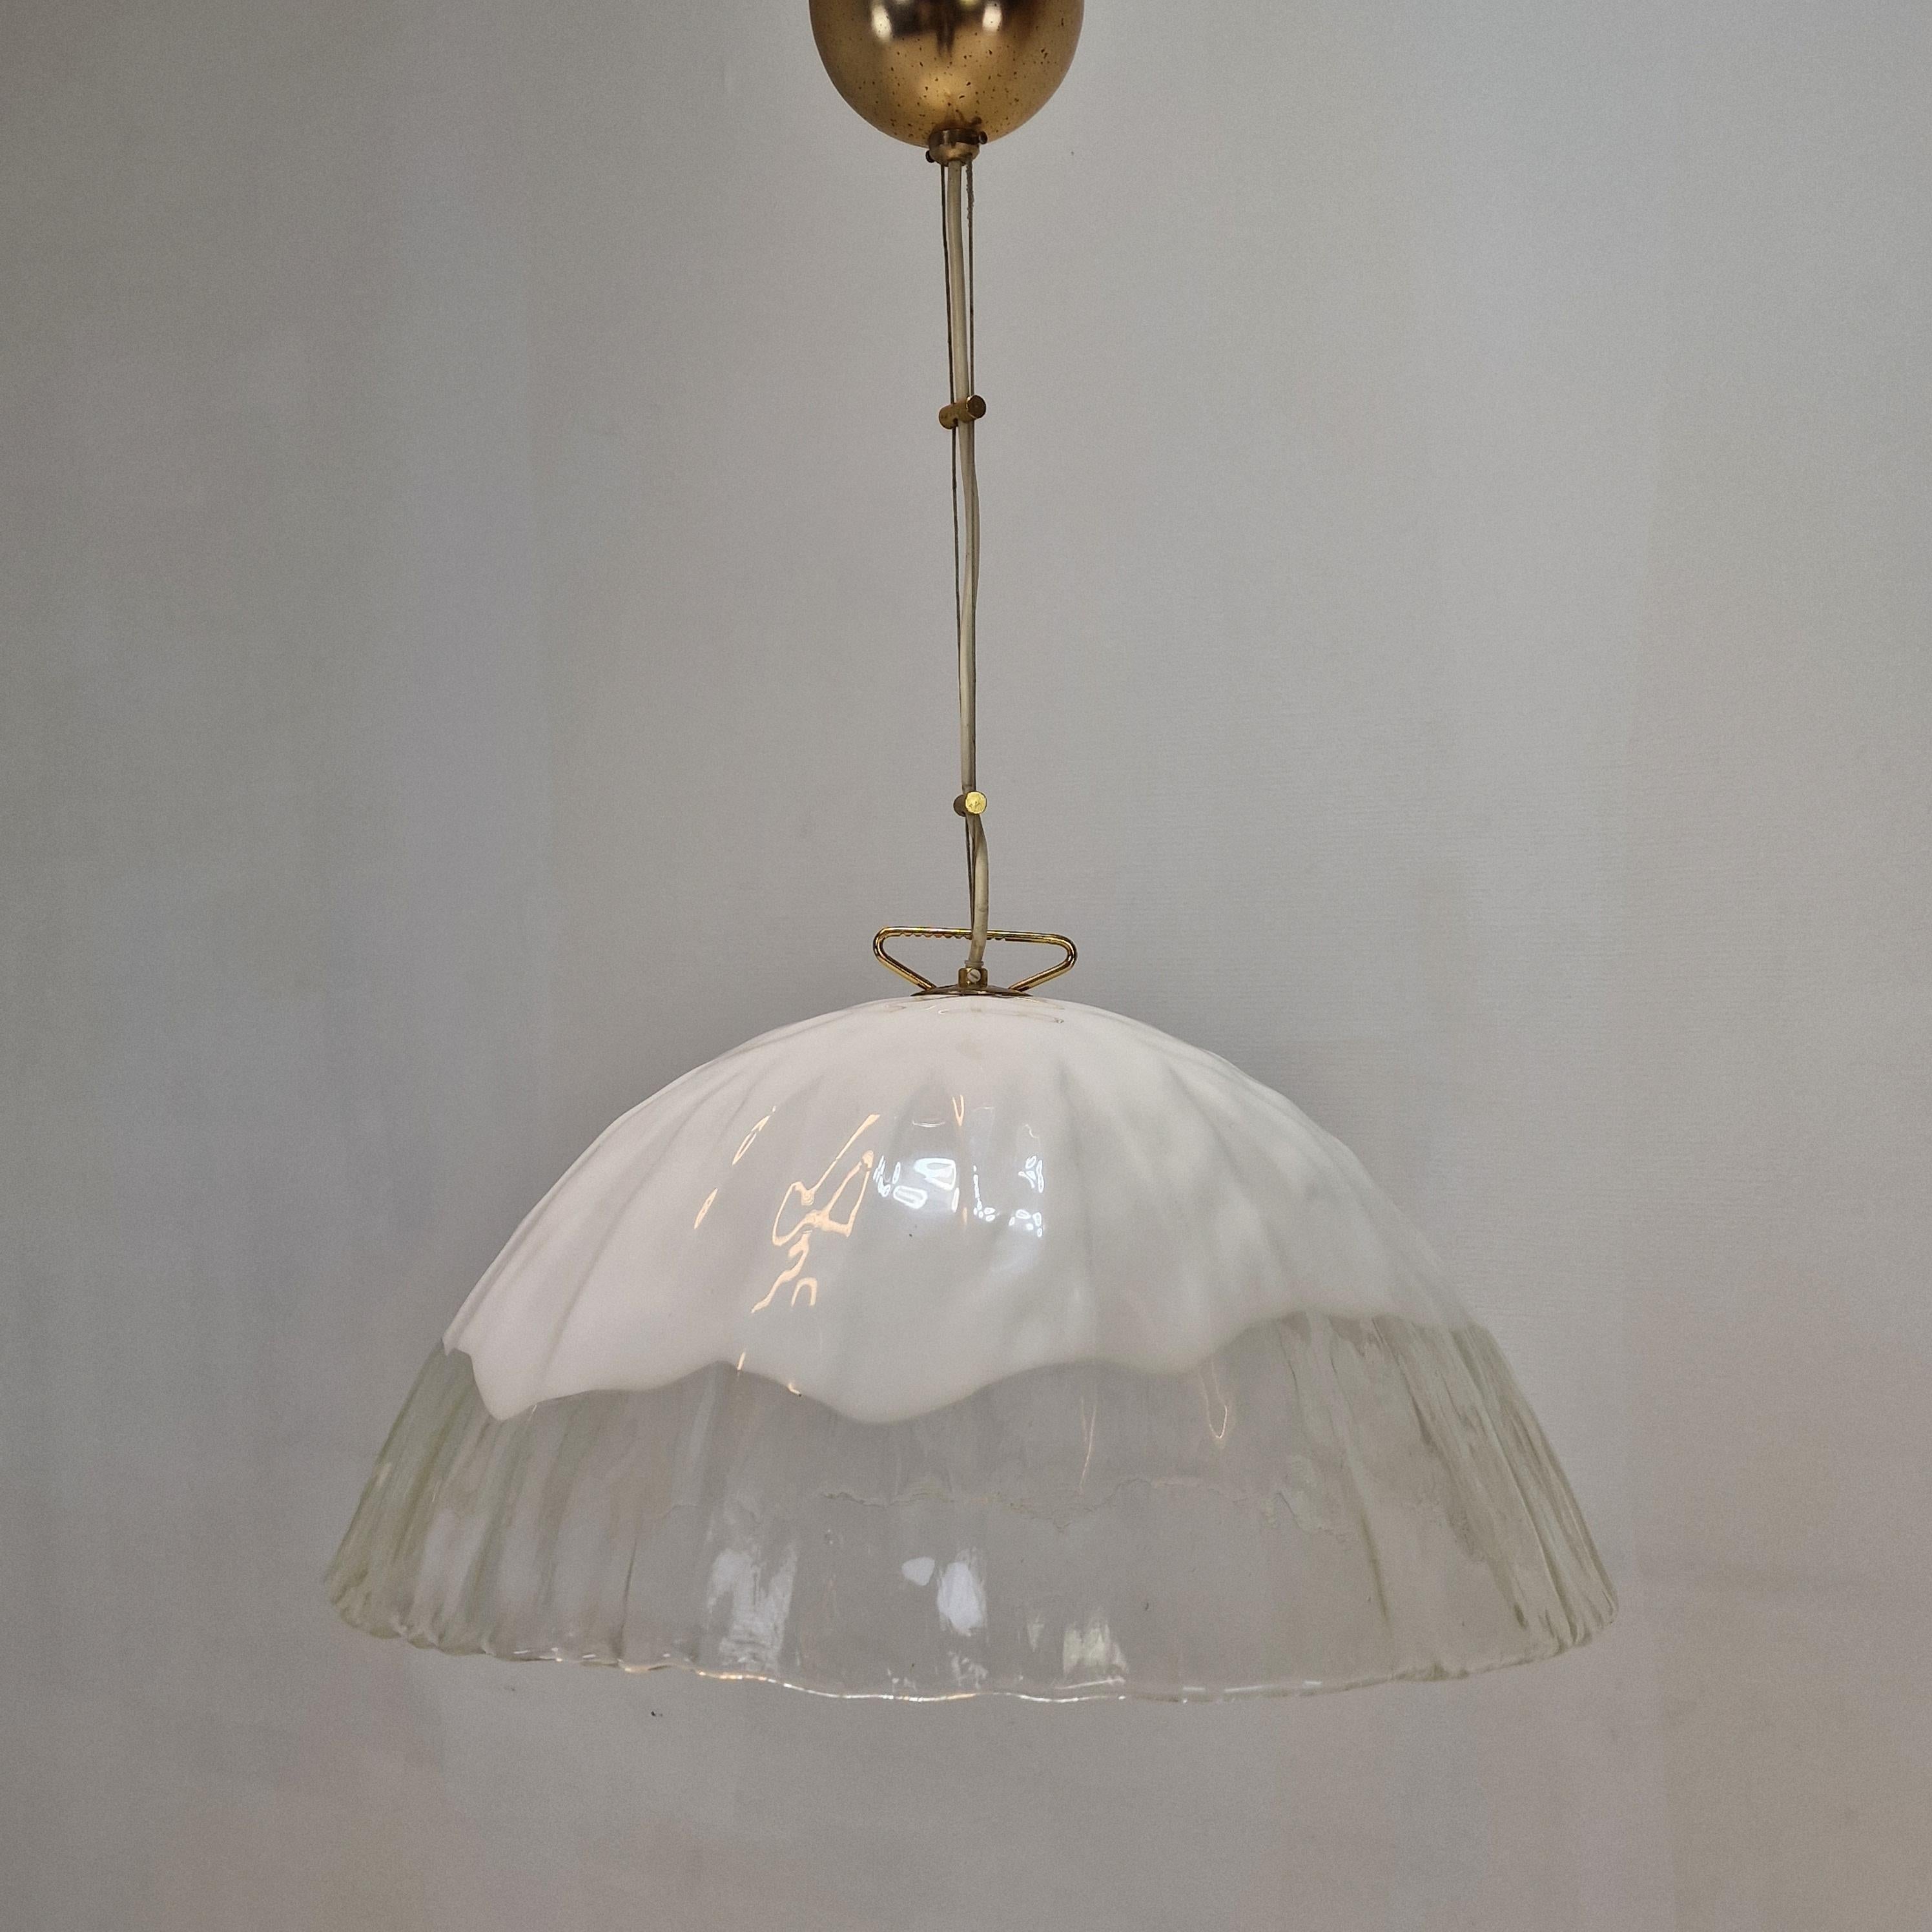 Hand-Crafted Murano Glass Pendant Lamp by 